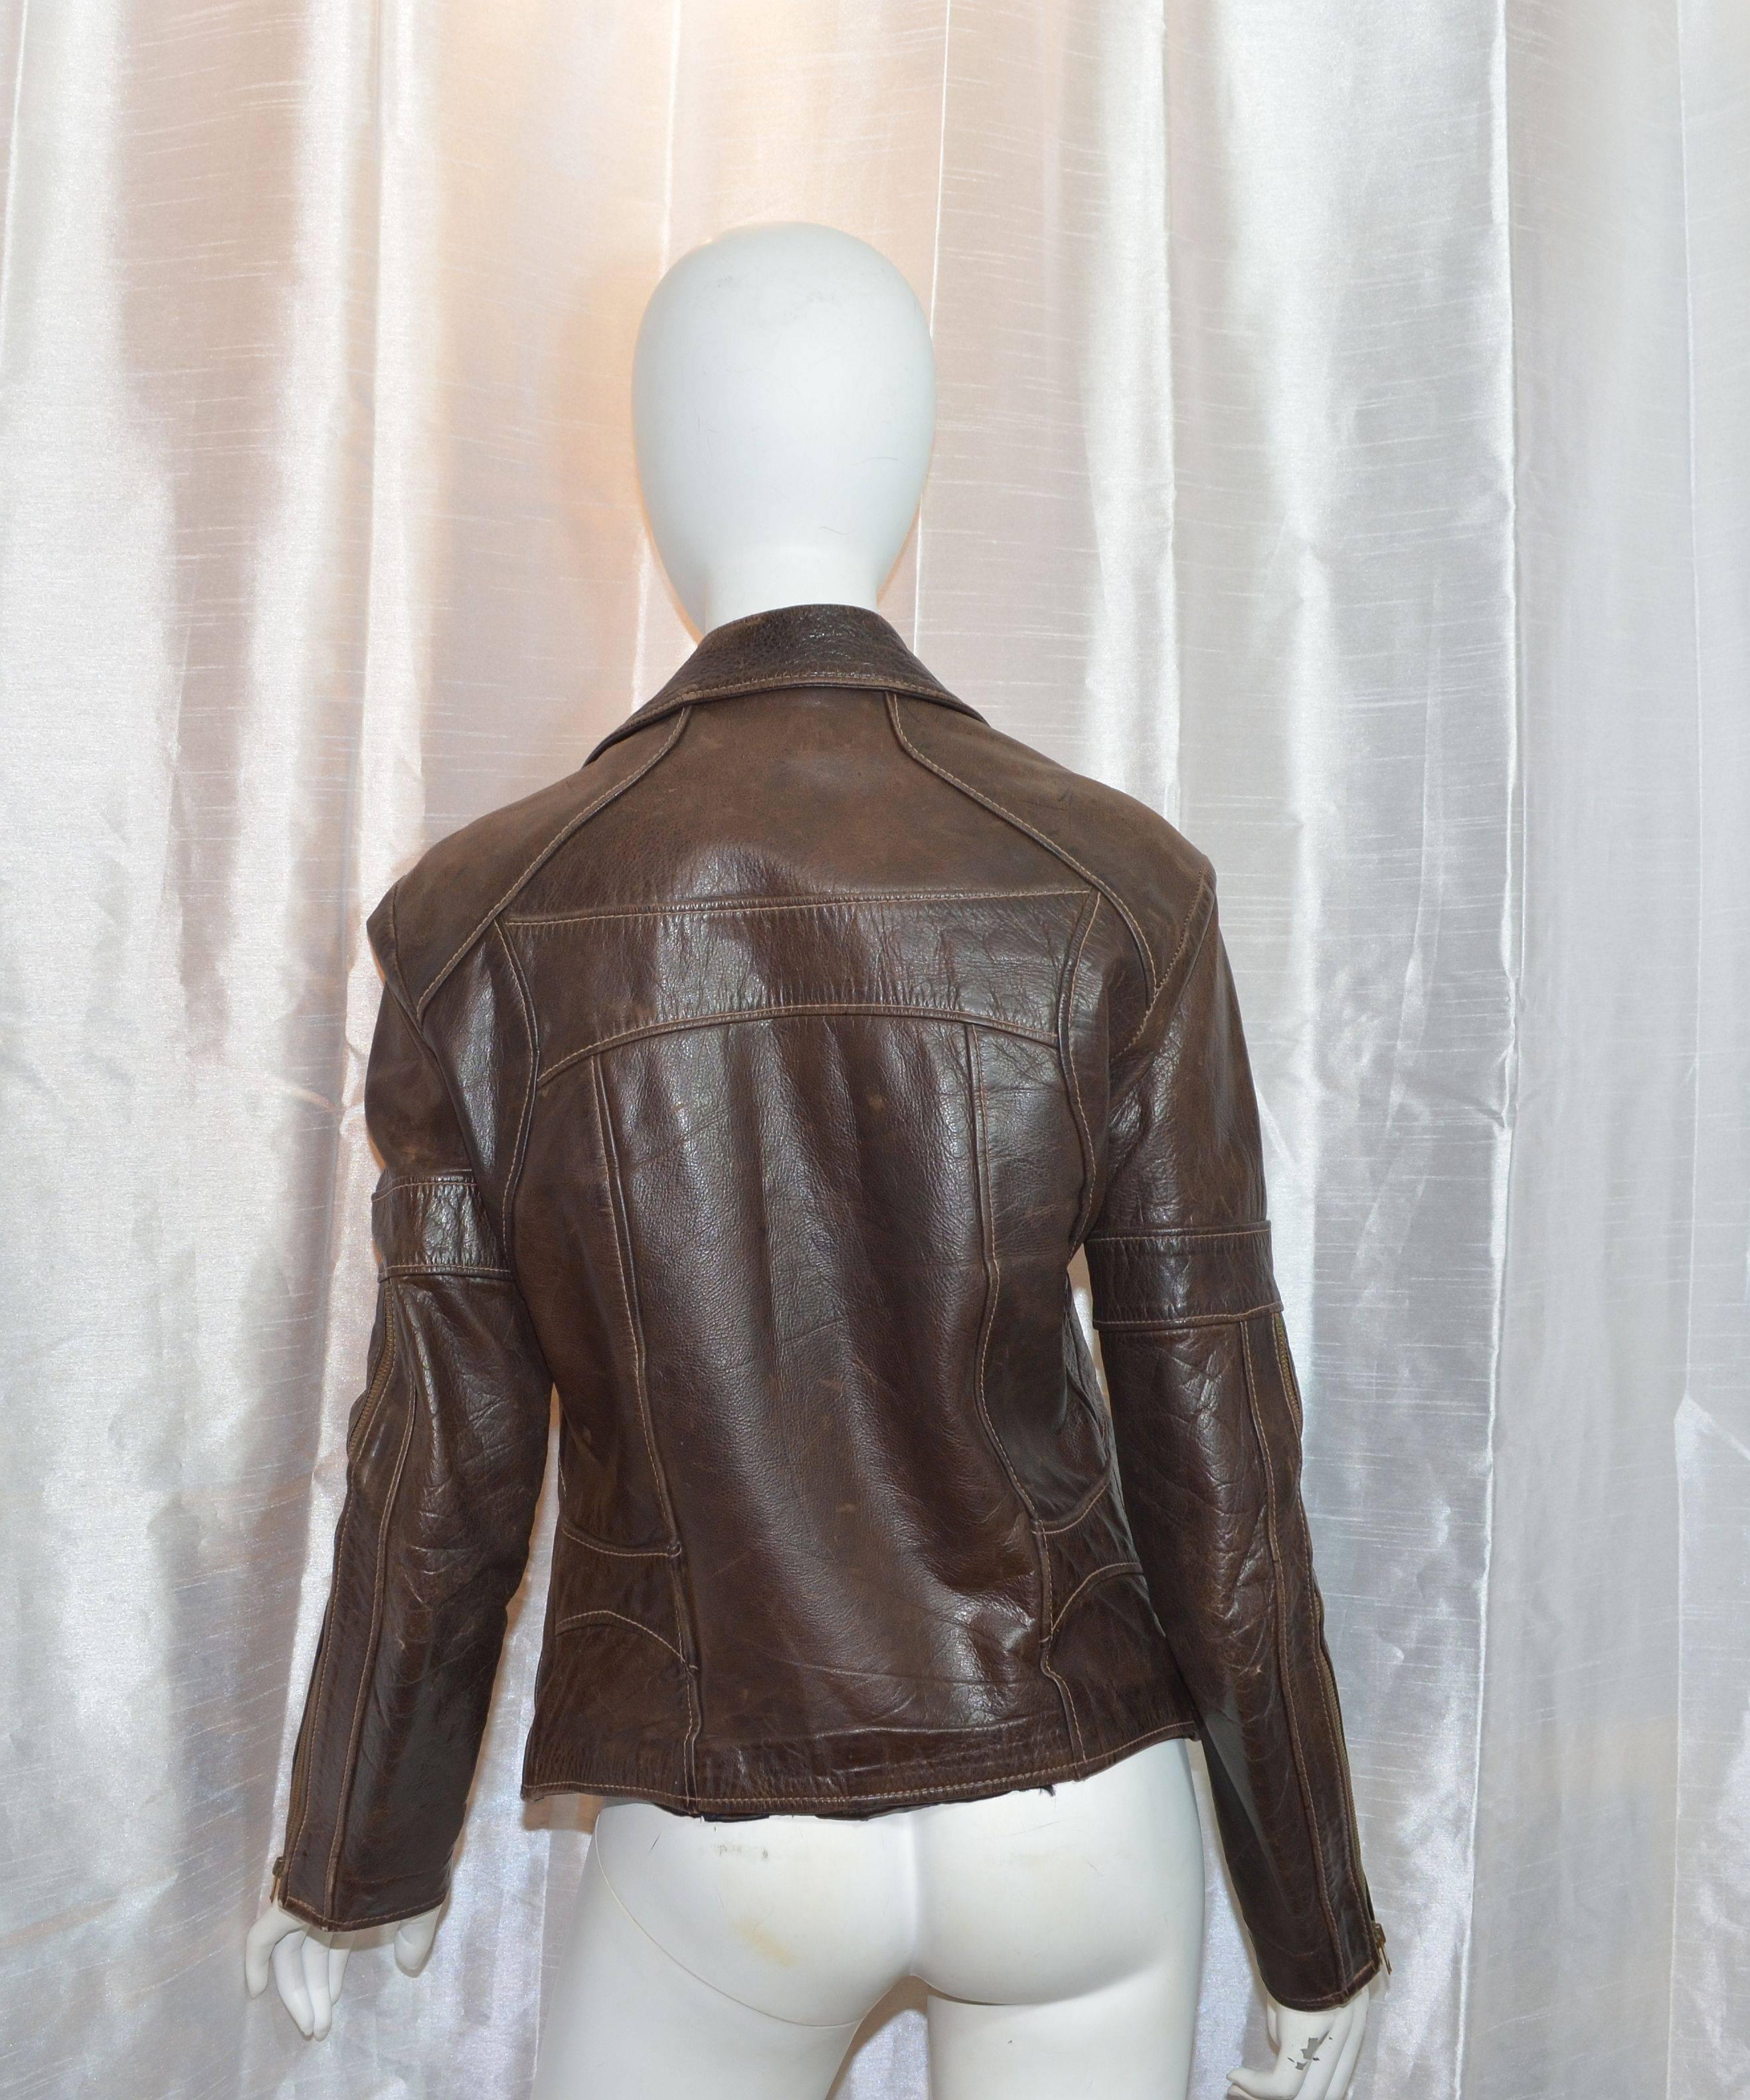 East West Musical Instruments Mango Road Buffalo Leather Zip Jacket

Mango Road vintage jacket featured in brown buffalo leather with a zippered front and two zippered front pockets, and zippered cuffs. Jacket is fully lined and has one interior